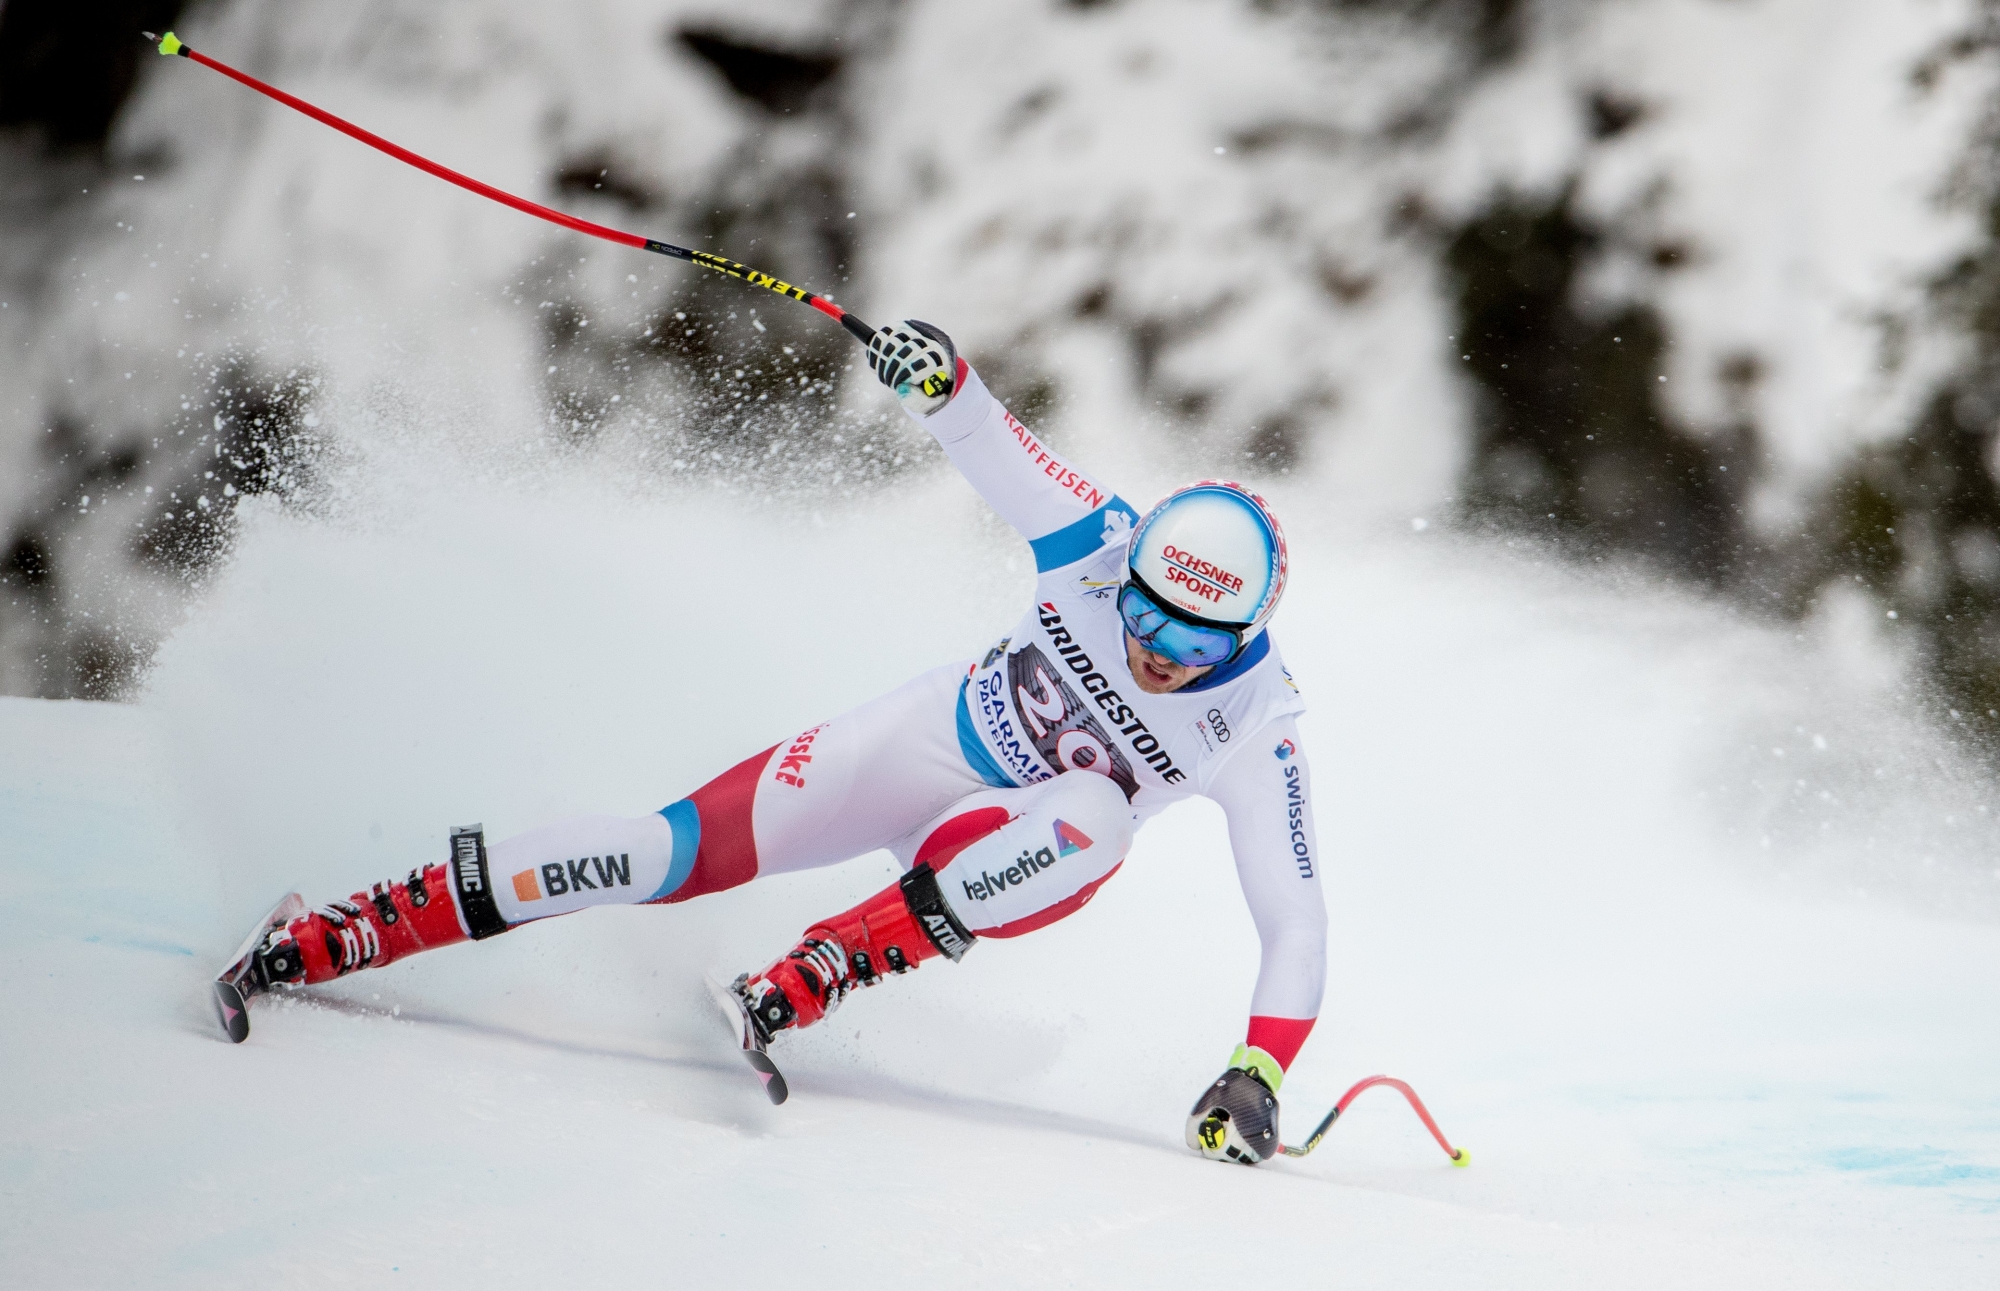 epa06475968 Mauro Caviezel of Switzerland in action during the second training for the Men's Downhill race of the FIS Alpine Skiing World Cup event in Garmisch-Partenkirchen, Germany, 26 January 2018.  EPA/LISI NIESNER GERMANY ALPINE SKIING WORLD CUP